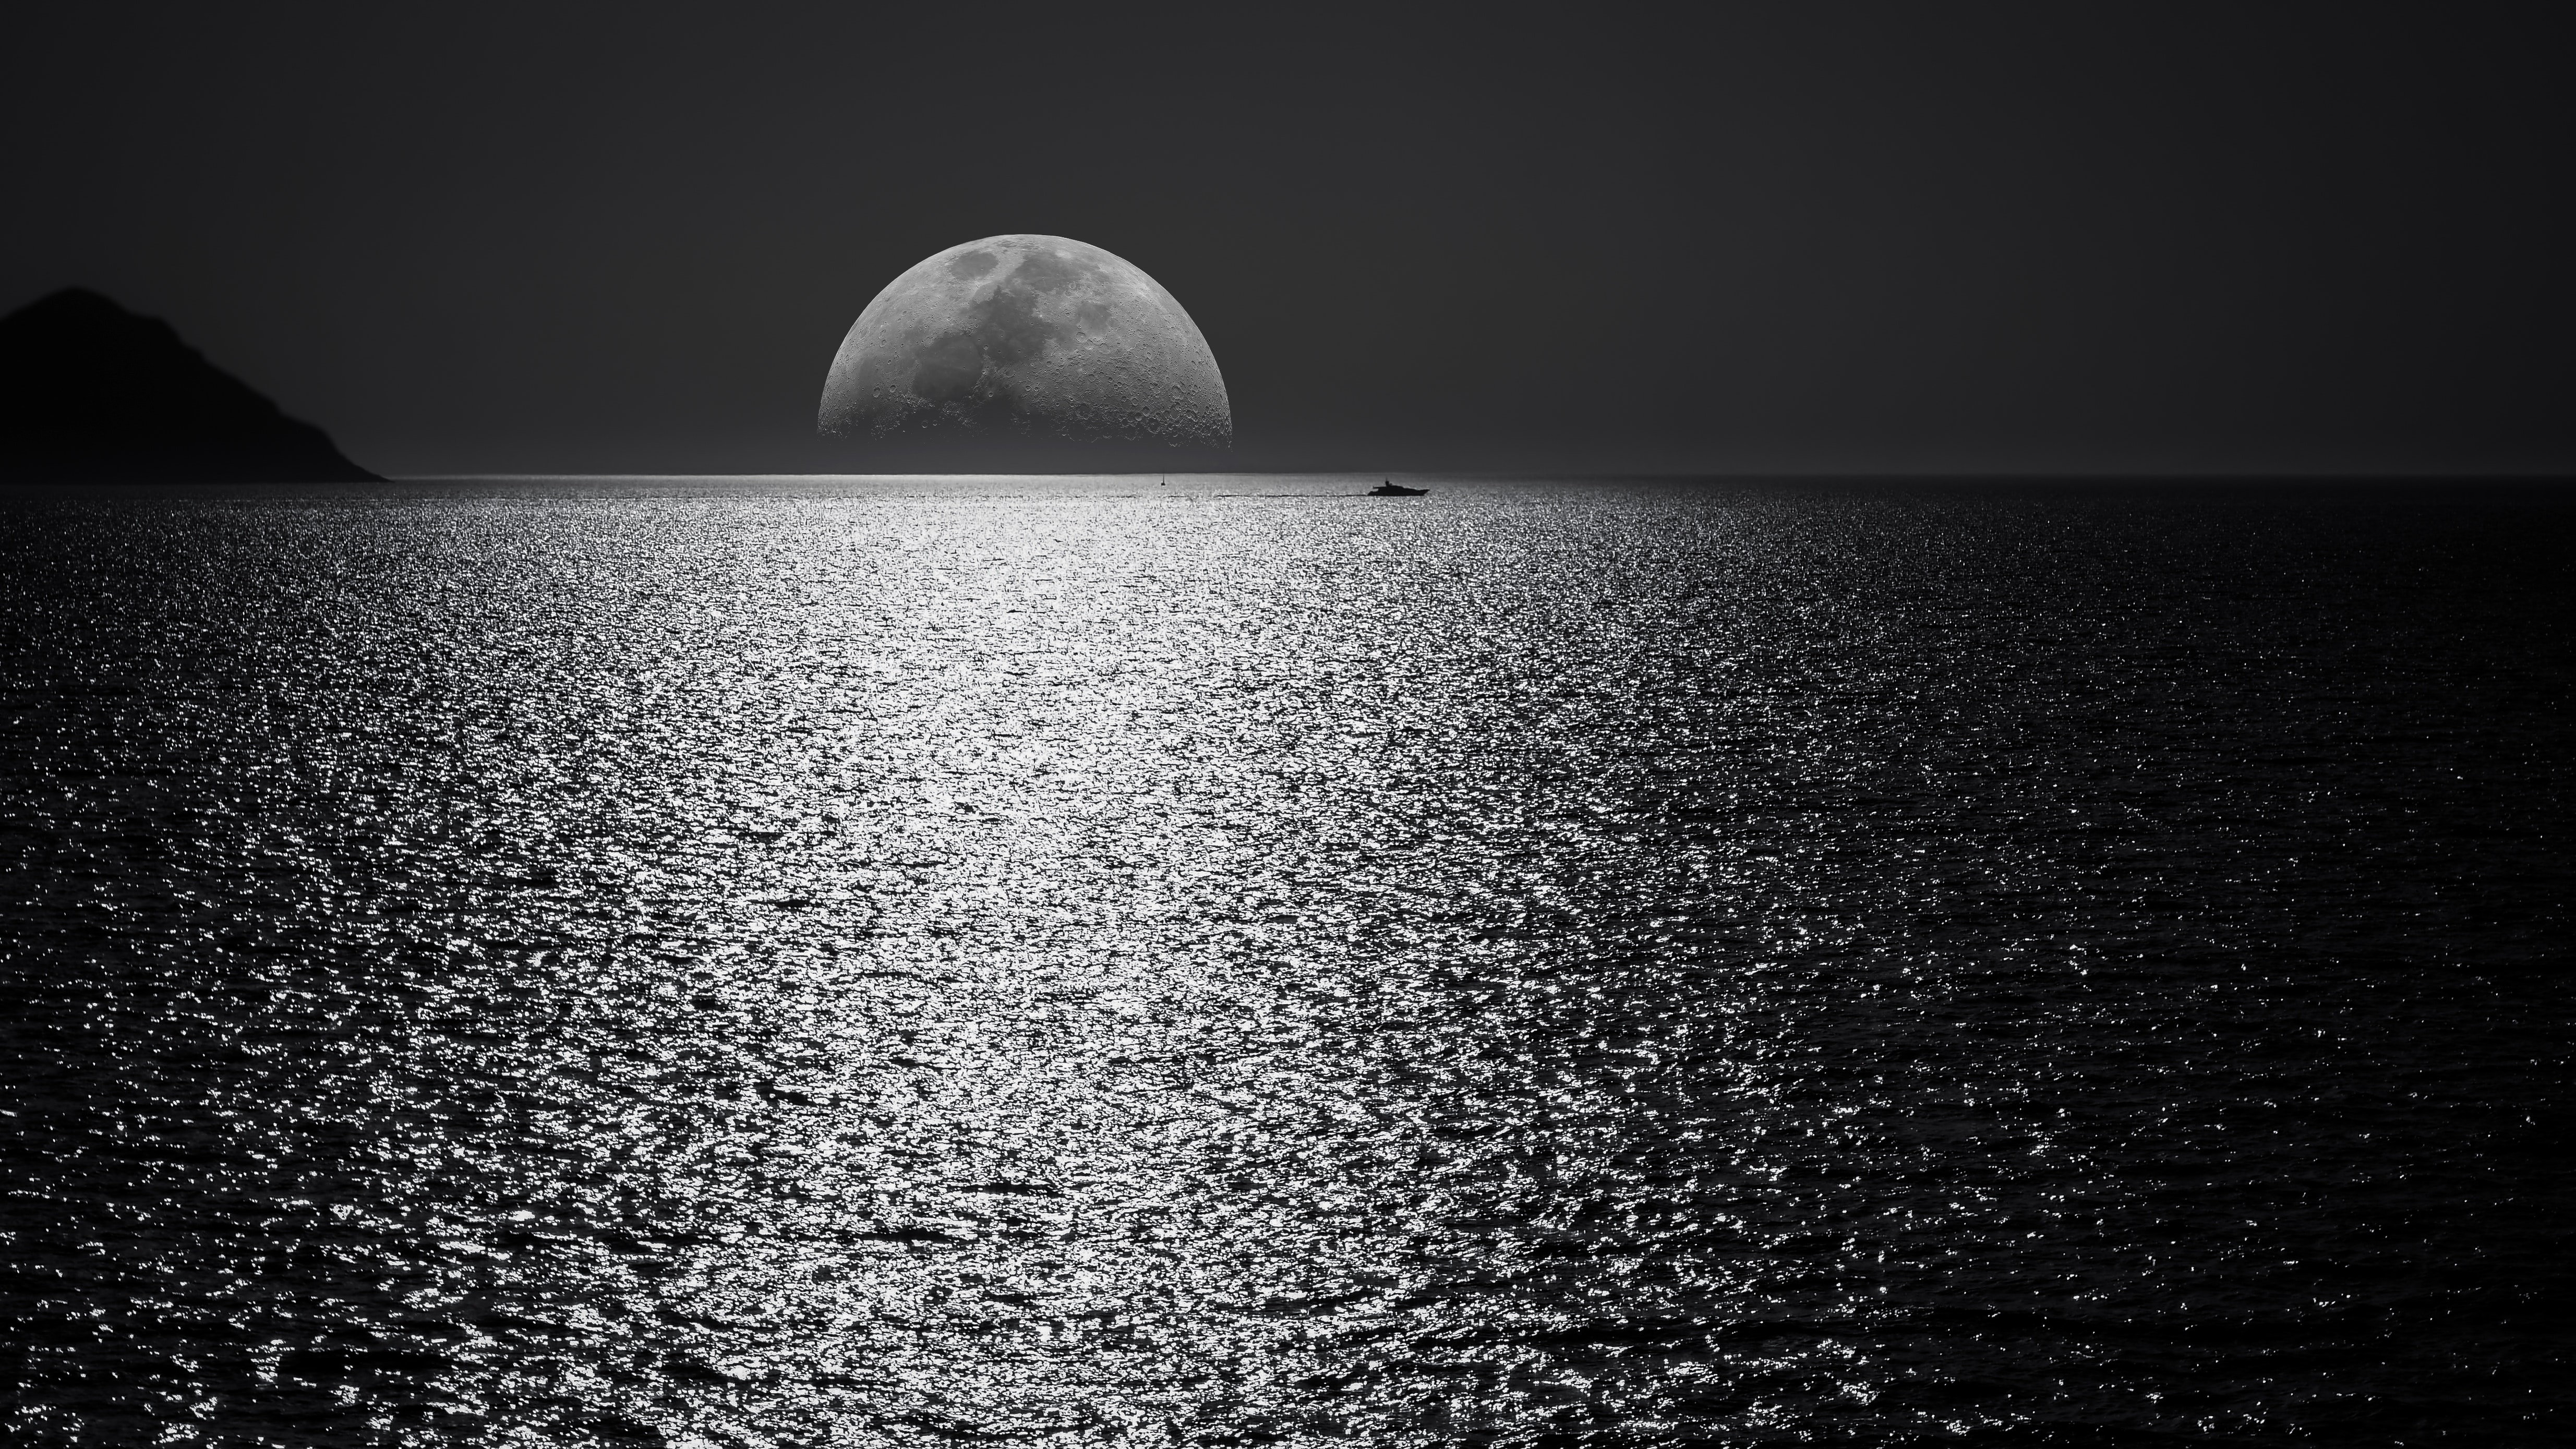 Black And White Moon Ocean During Night Time, HD Nature, 4k Wallpaper, Image, Background, Photo and Picture